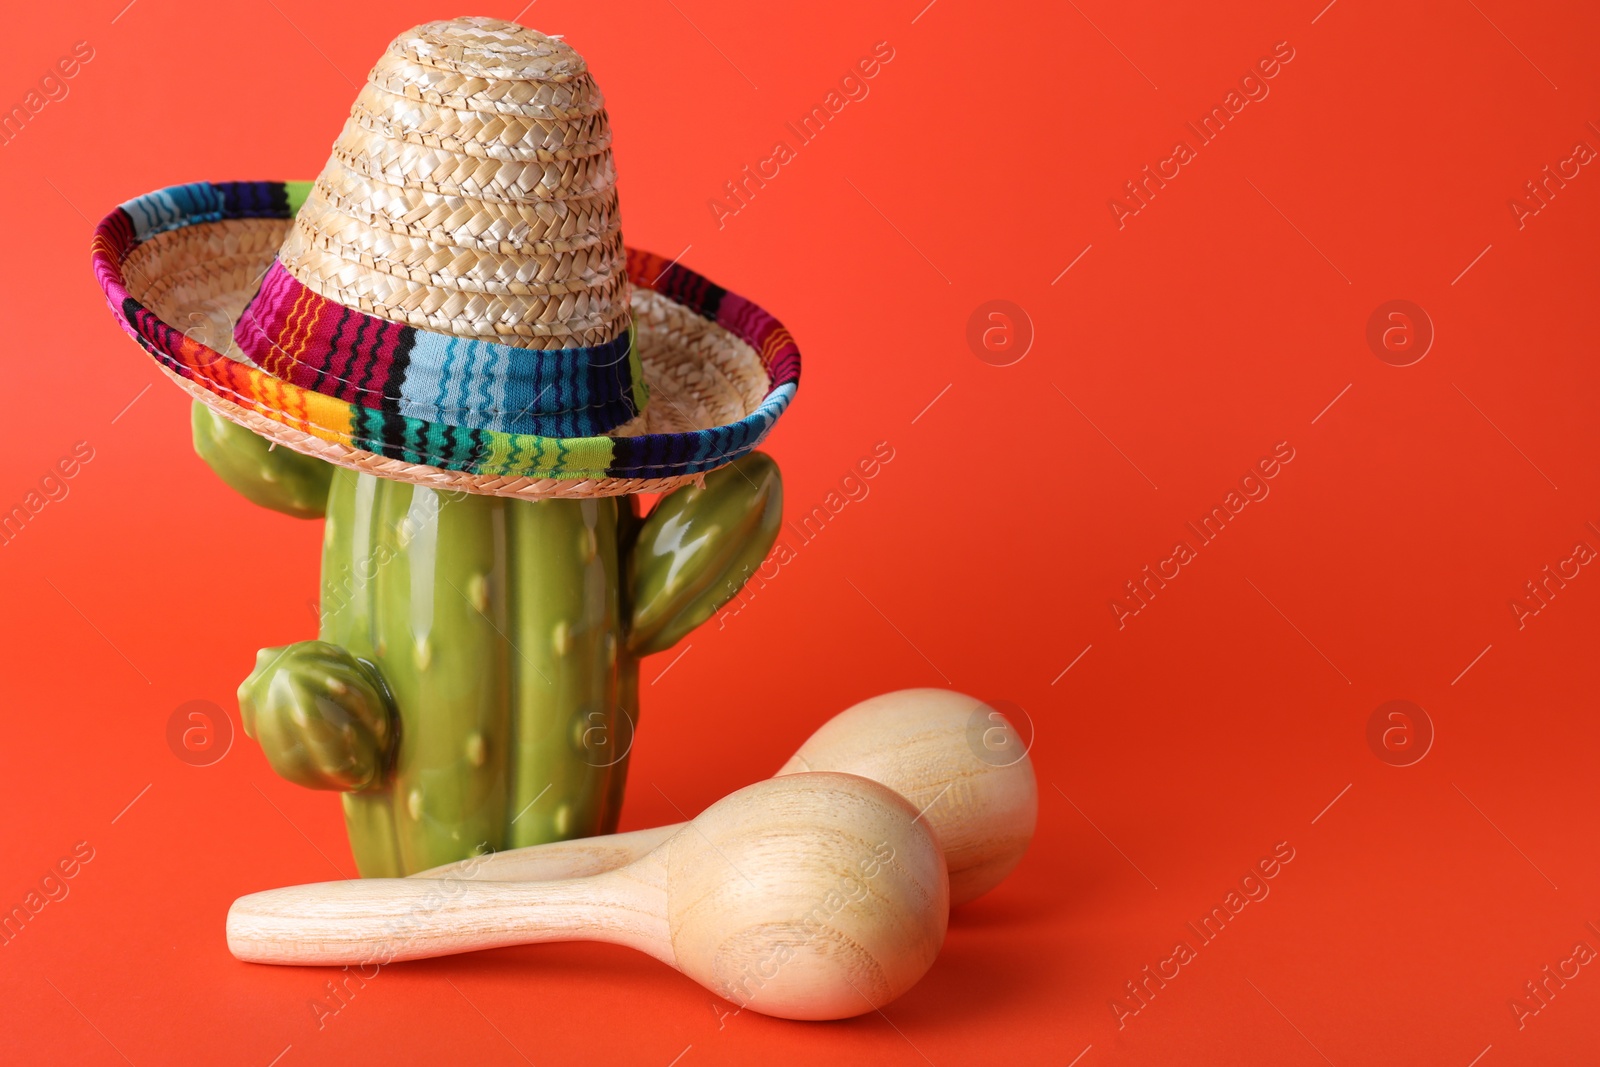 Photo of Wooden maracas and toy cactus with sombrero hat on red background, space for text. Musical instrument